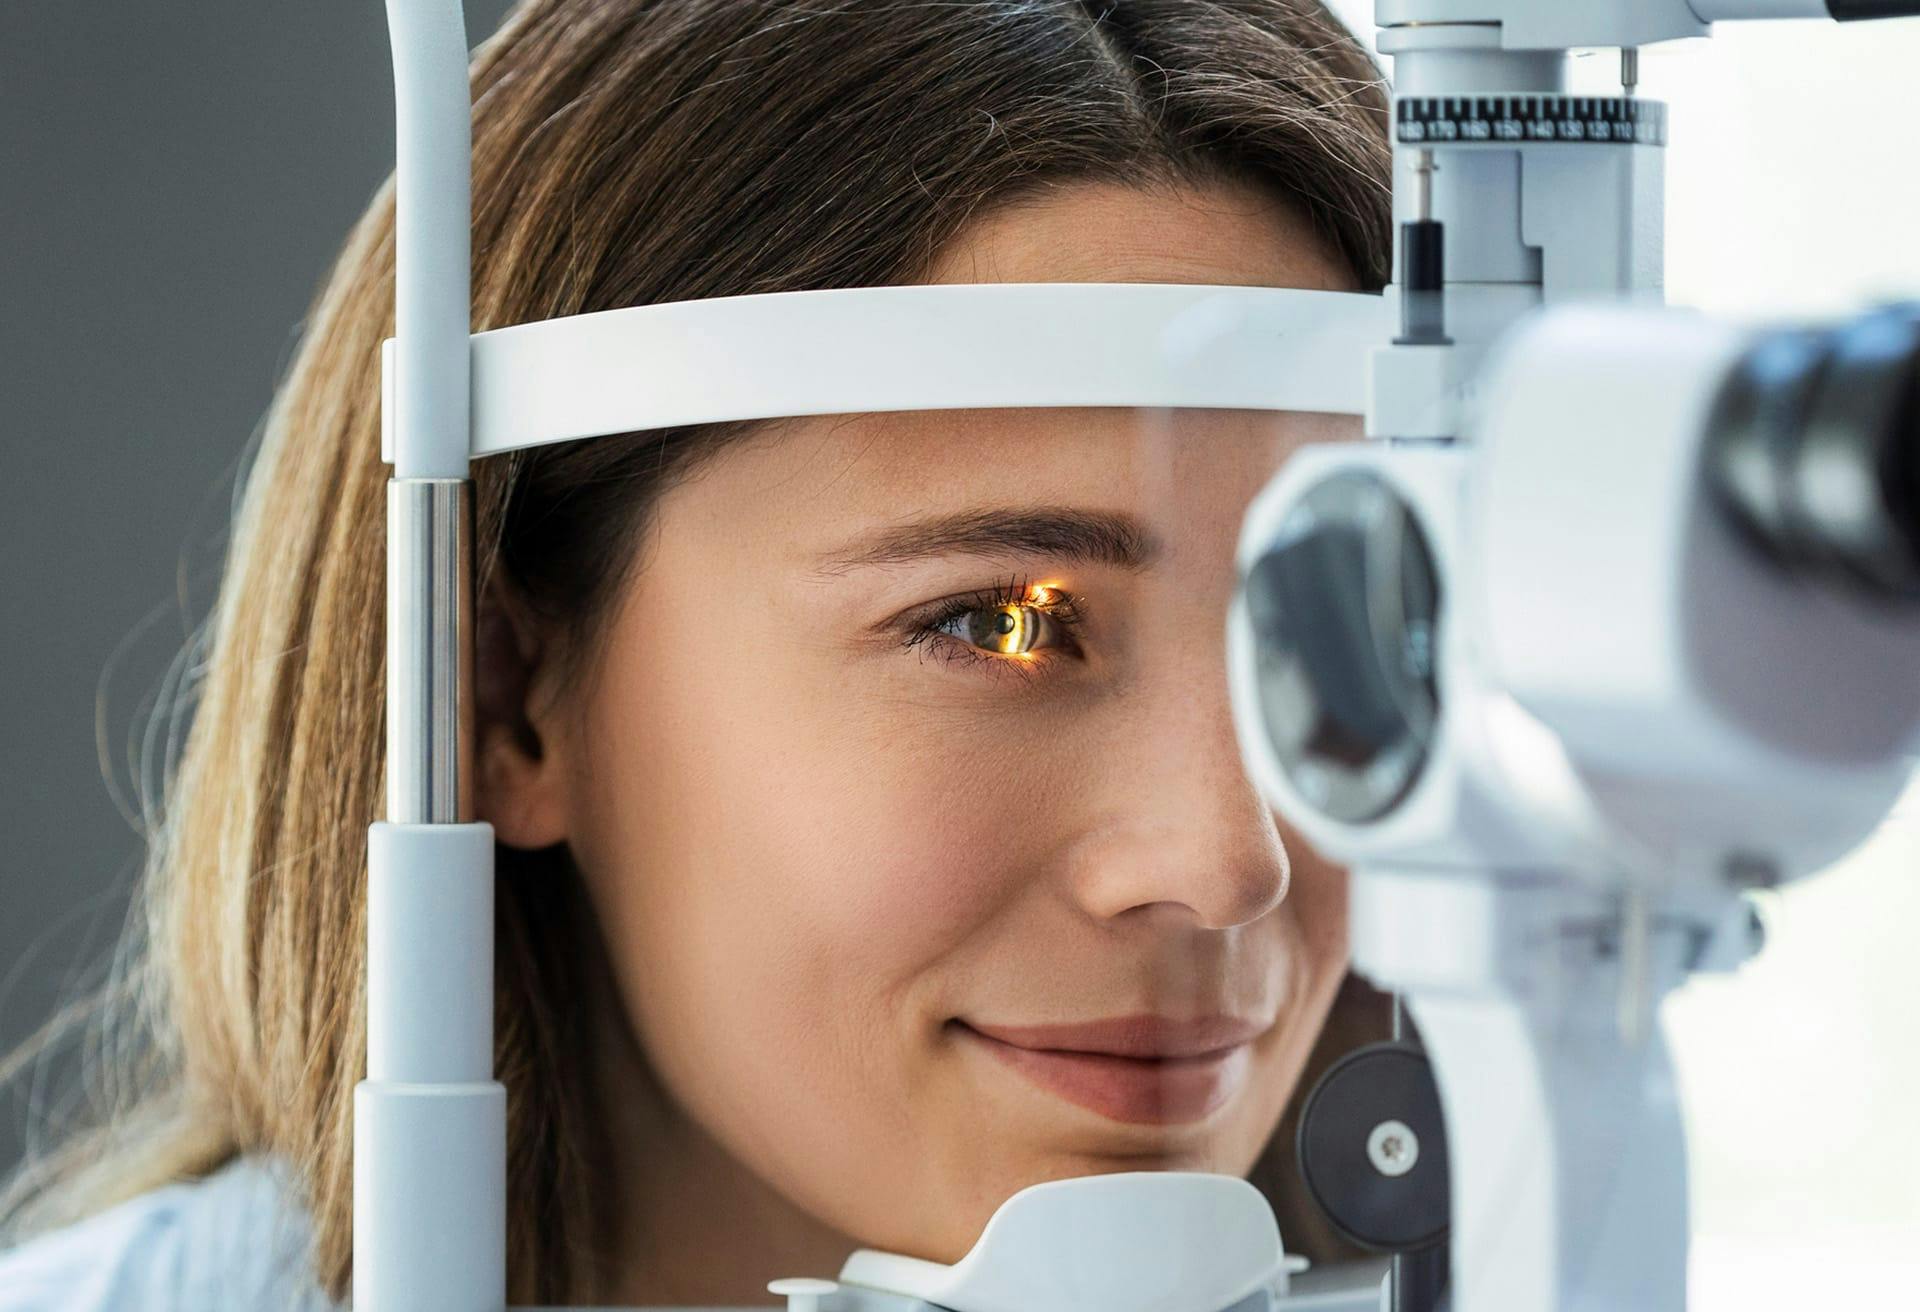 Female patient getting an eye exam